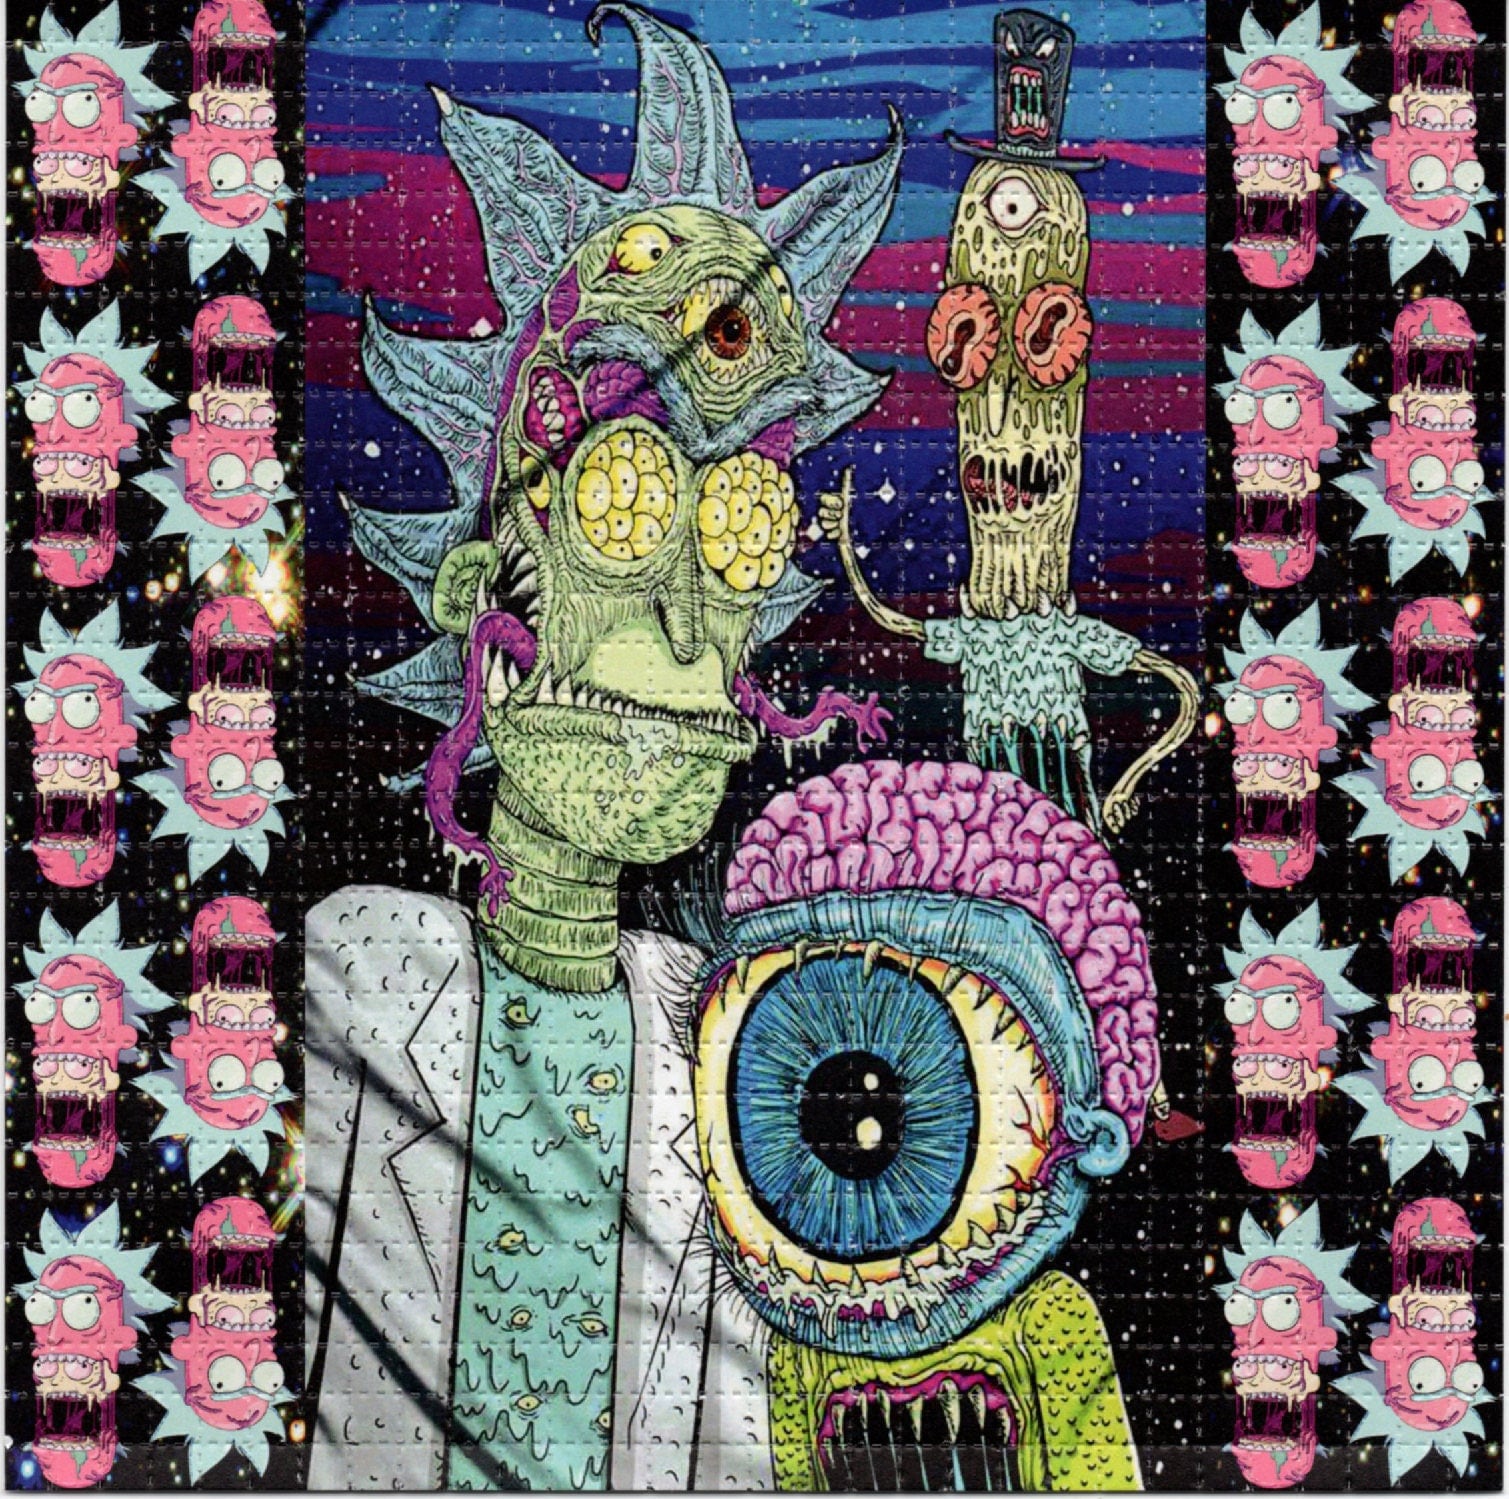 TRIPPING Rick and Morty BLOTTER Art perforated acid art